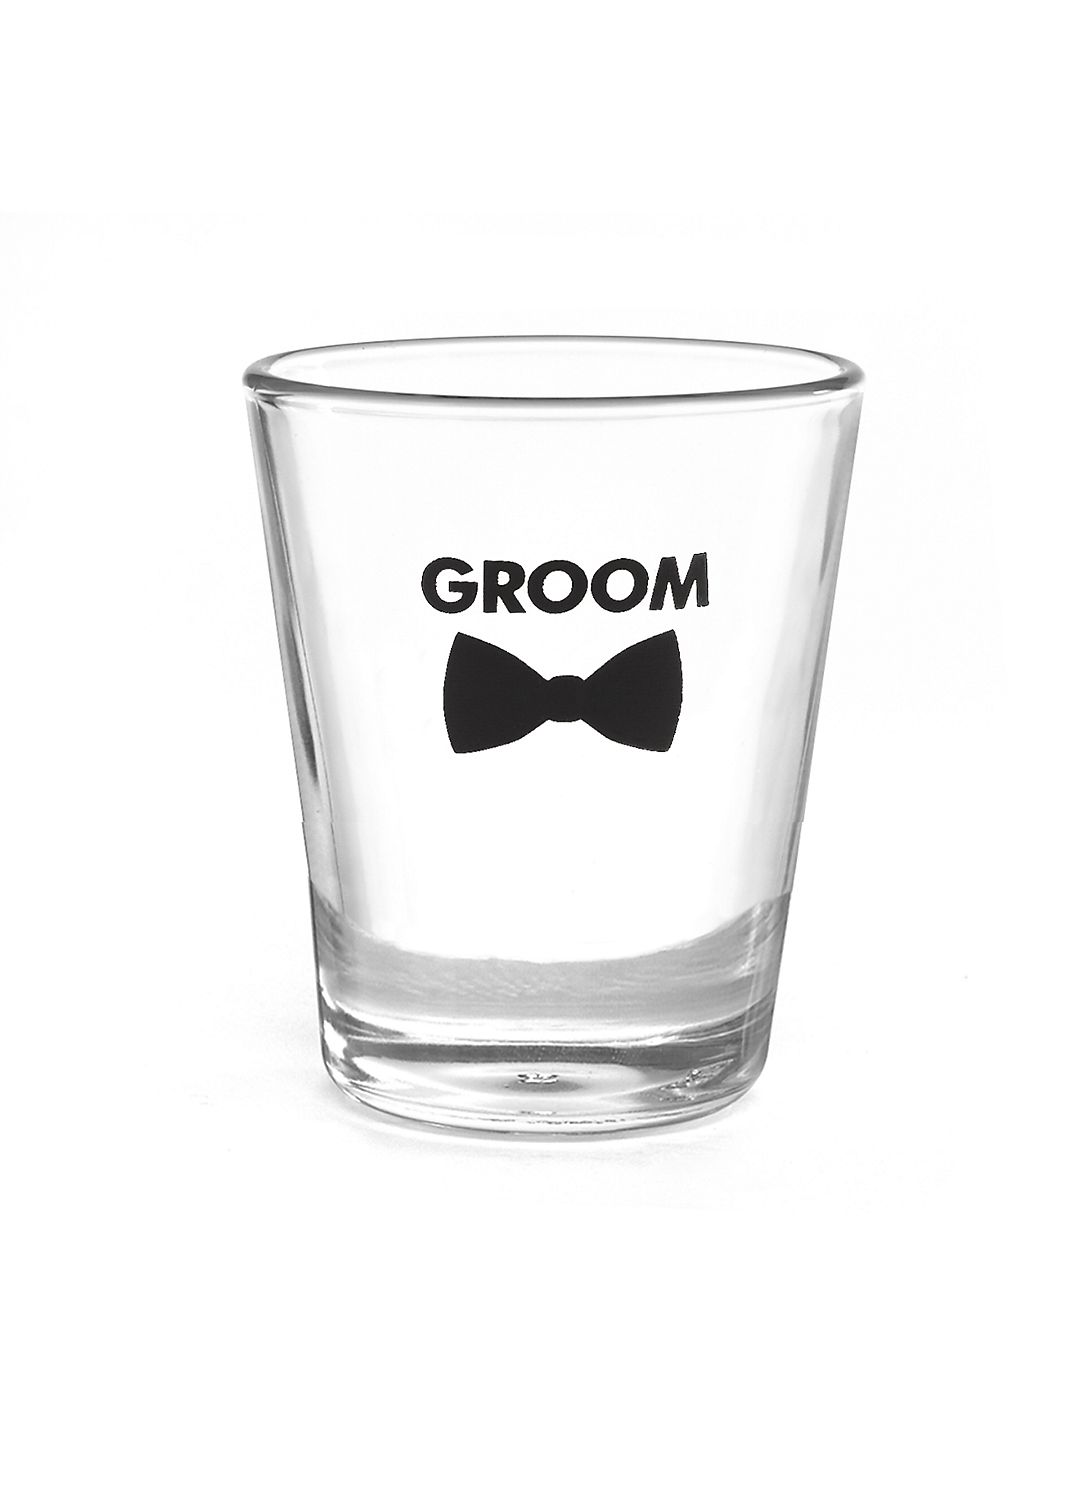 Groom Bow Tie Wedding Party Shot Glasses Image